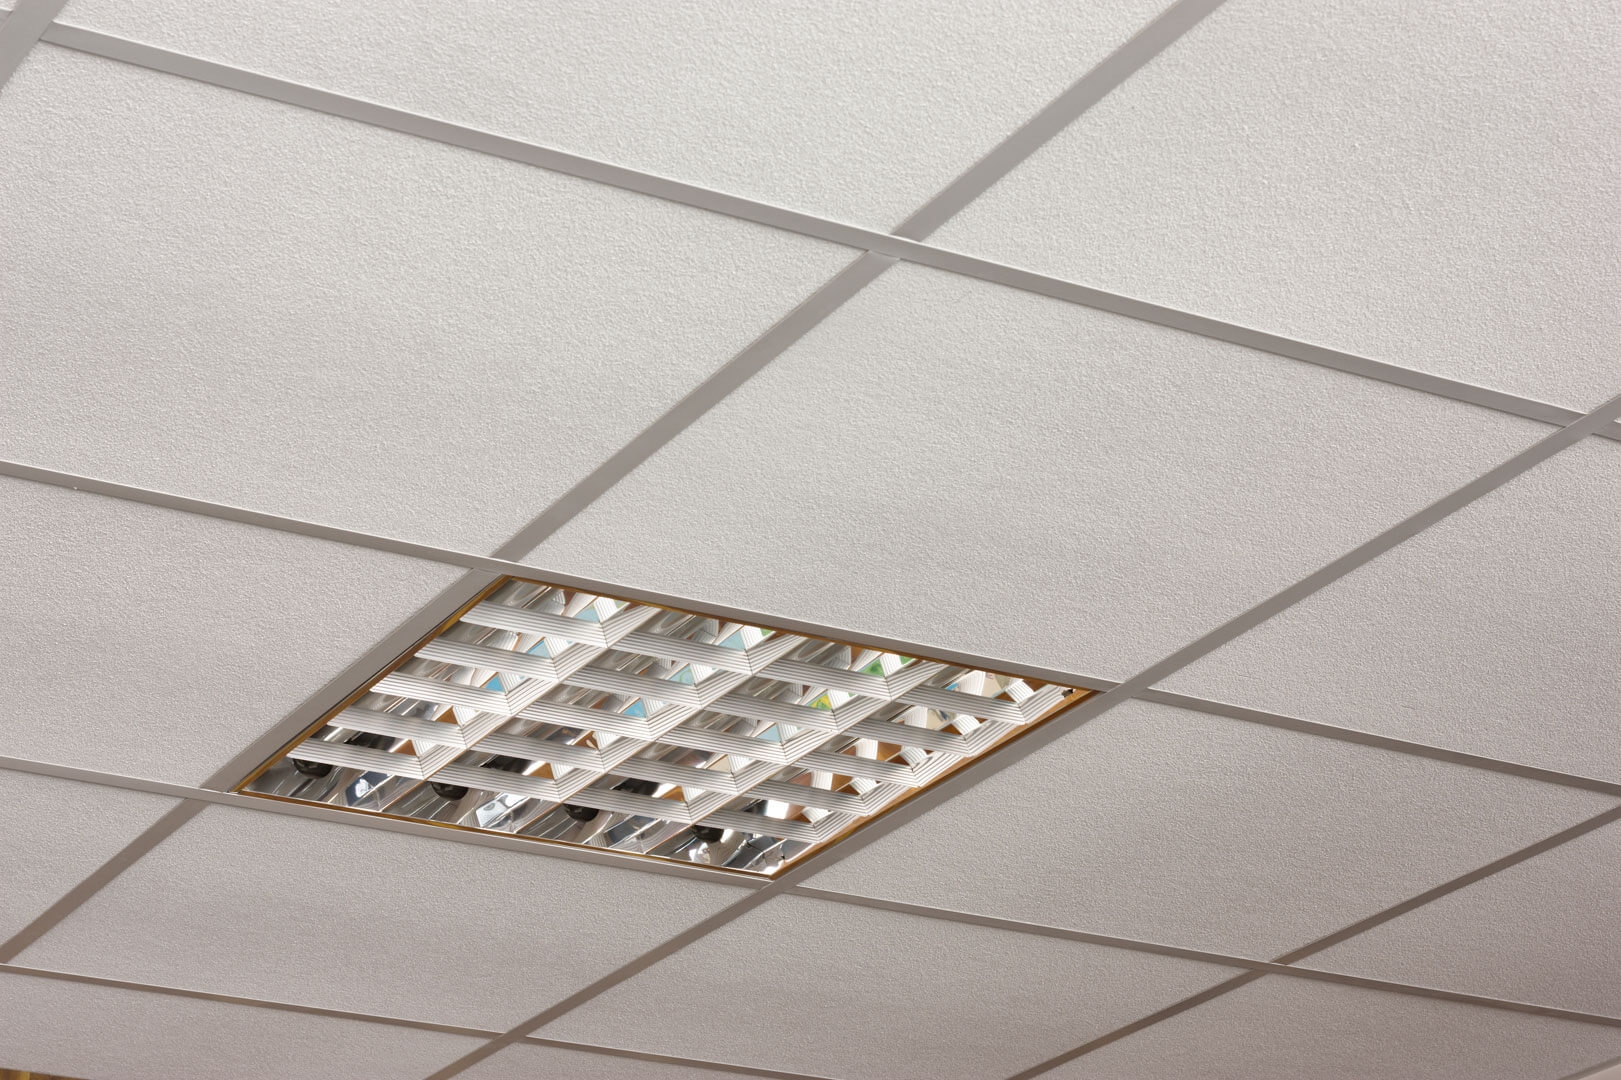 Armstrong 670 Vinyl Ceiling Tile Armstrong 670 Vinyl Ceiling Tile ceiling tile grid collection ceiling 1621 X 1080